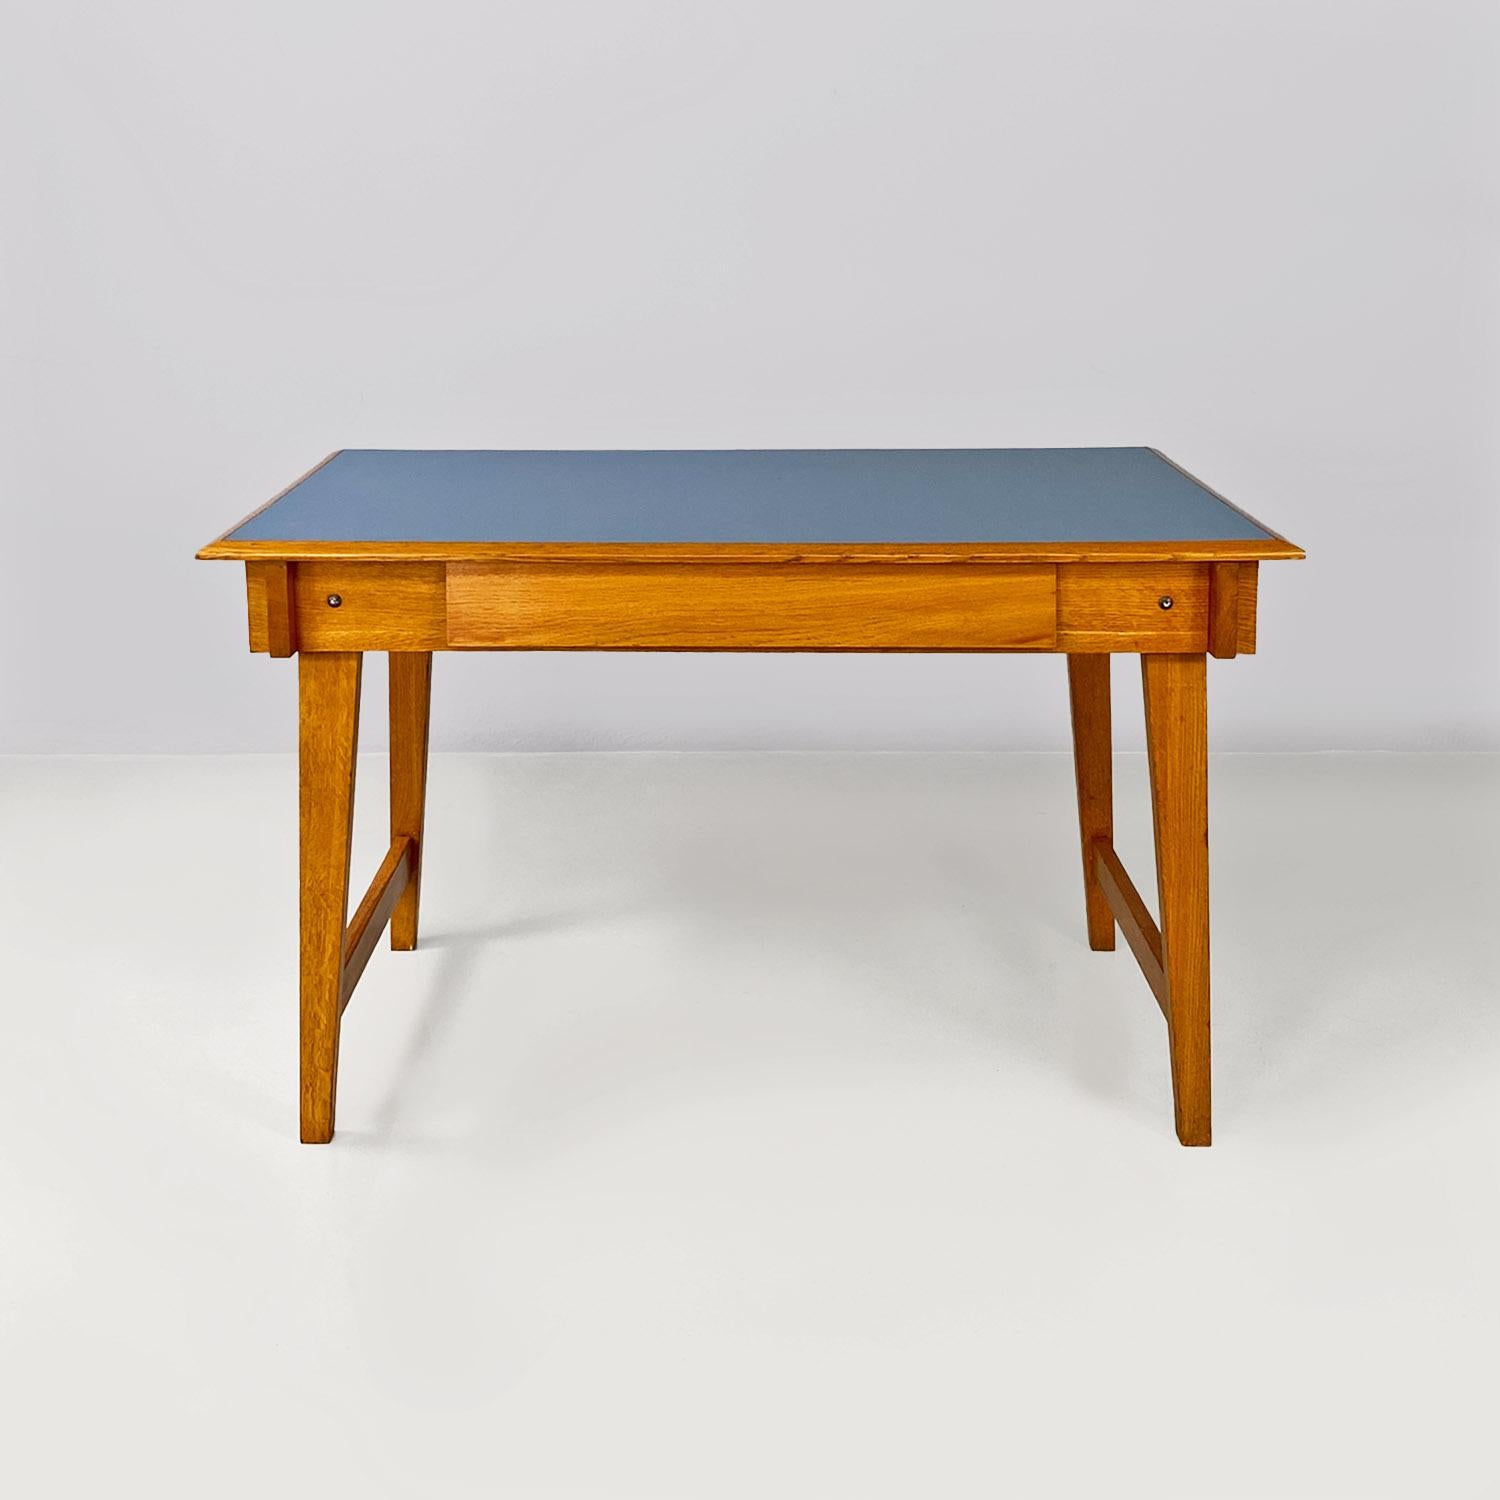 Italian mid-century modern, light blue laminate and solid wood desk, with drawer, 1960s.
Desk with rectangular top in light blue Formica, with light solid wood structure, composed of four legs and a central drawer. Coming from the R. Enaudi